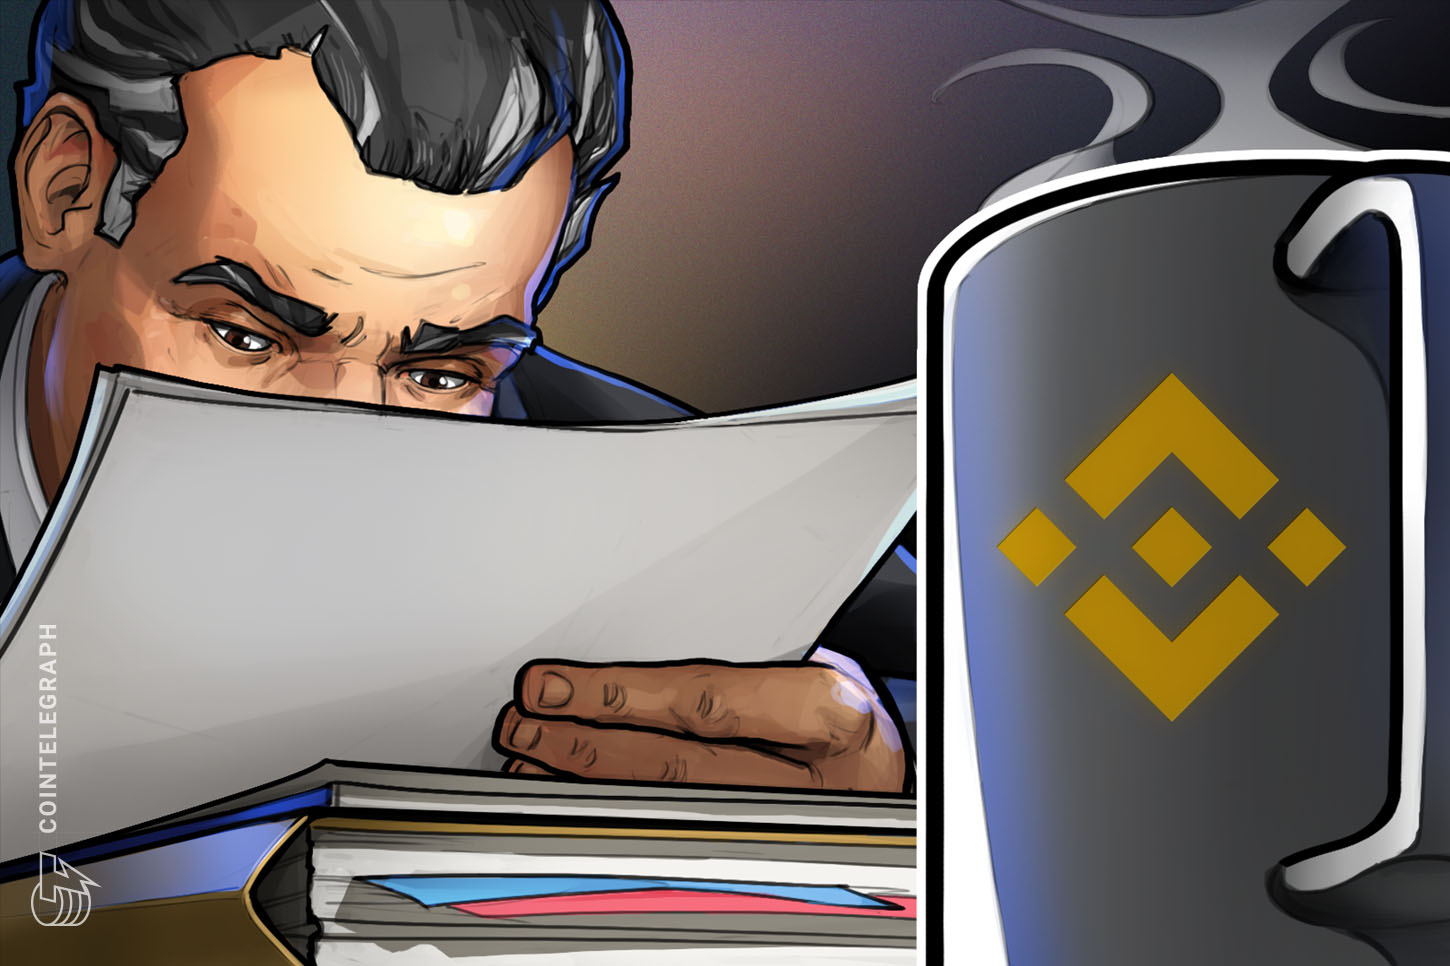 Binance hires Trump lawyer who helped put Gawker Media out of enterprise